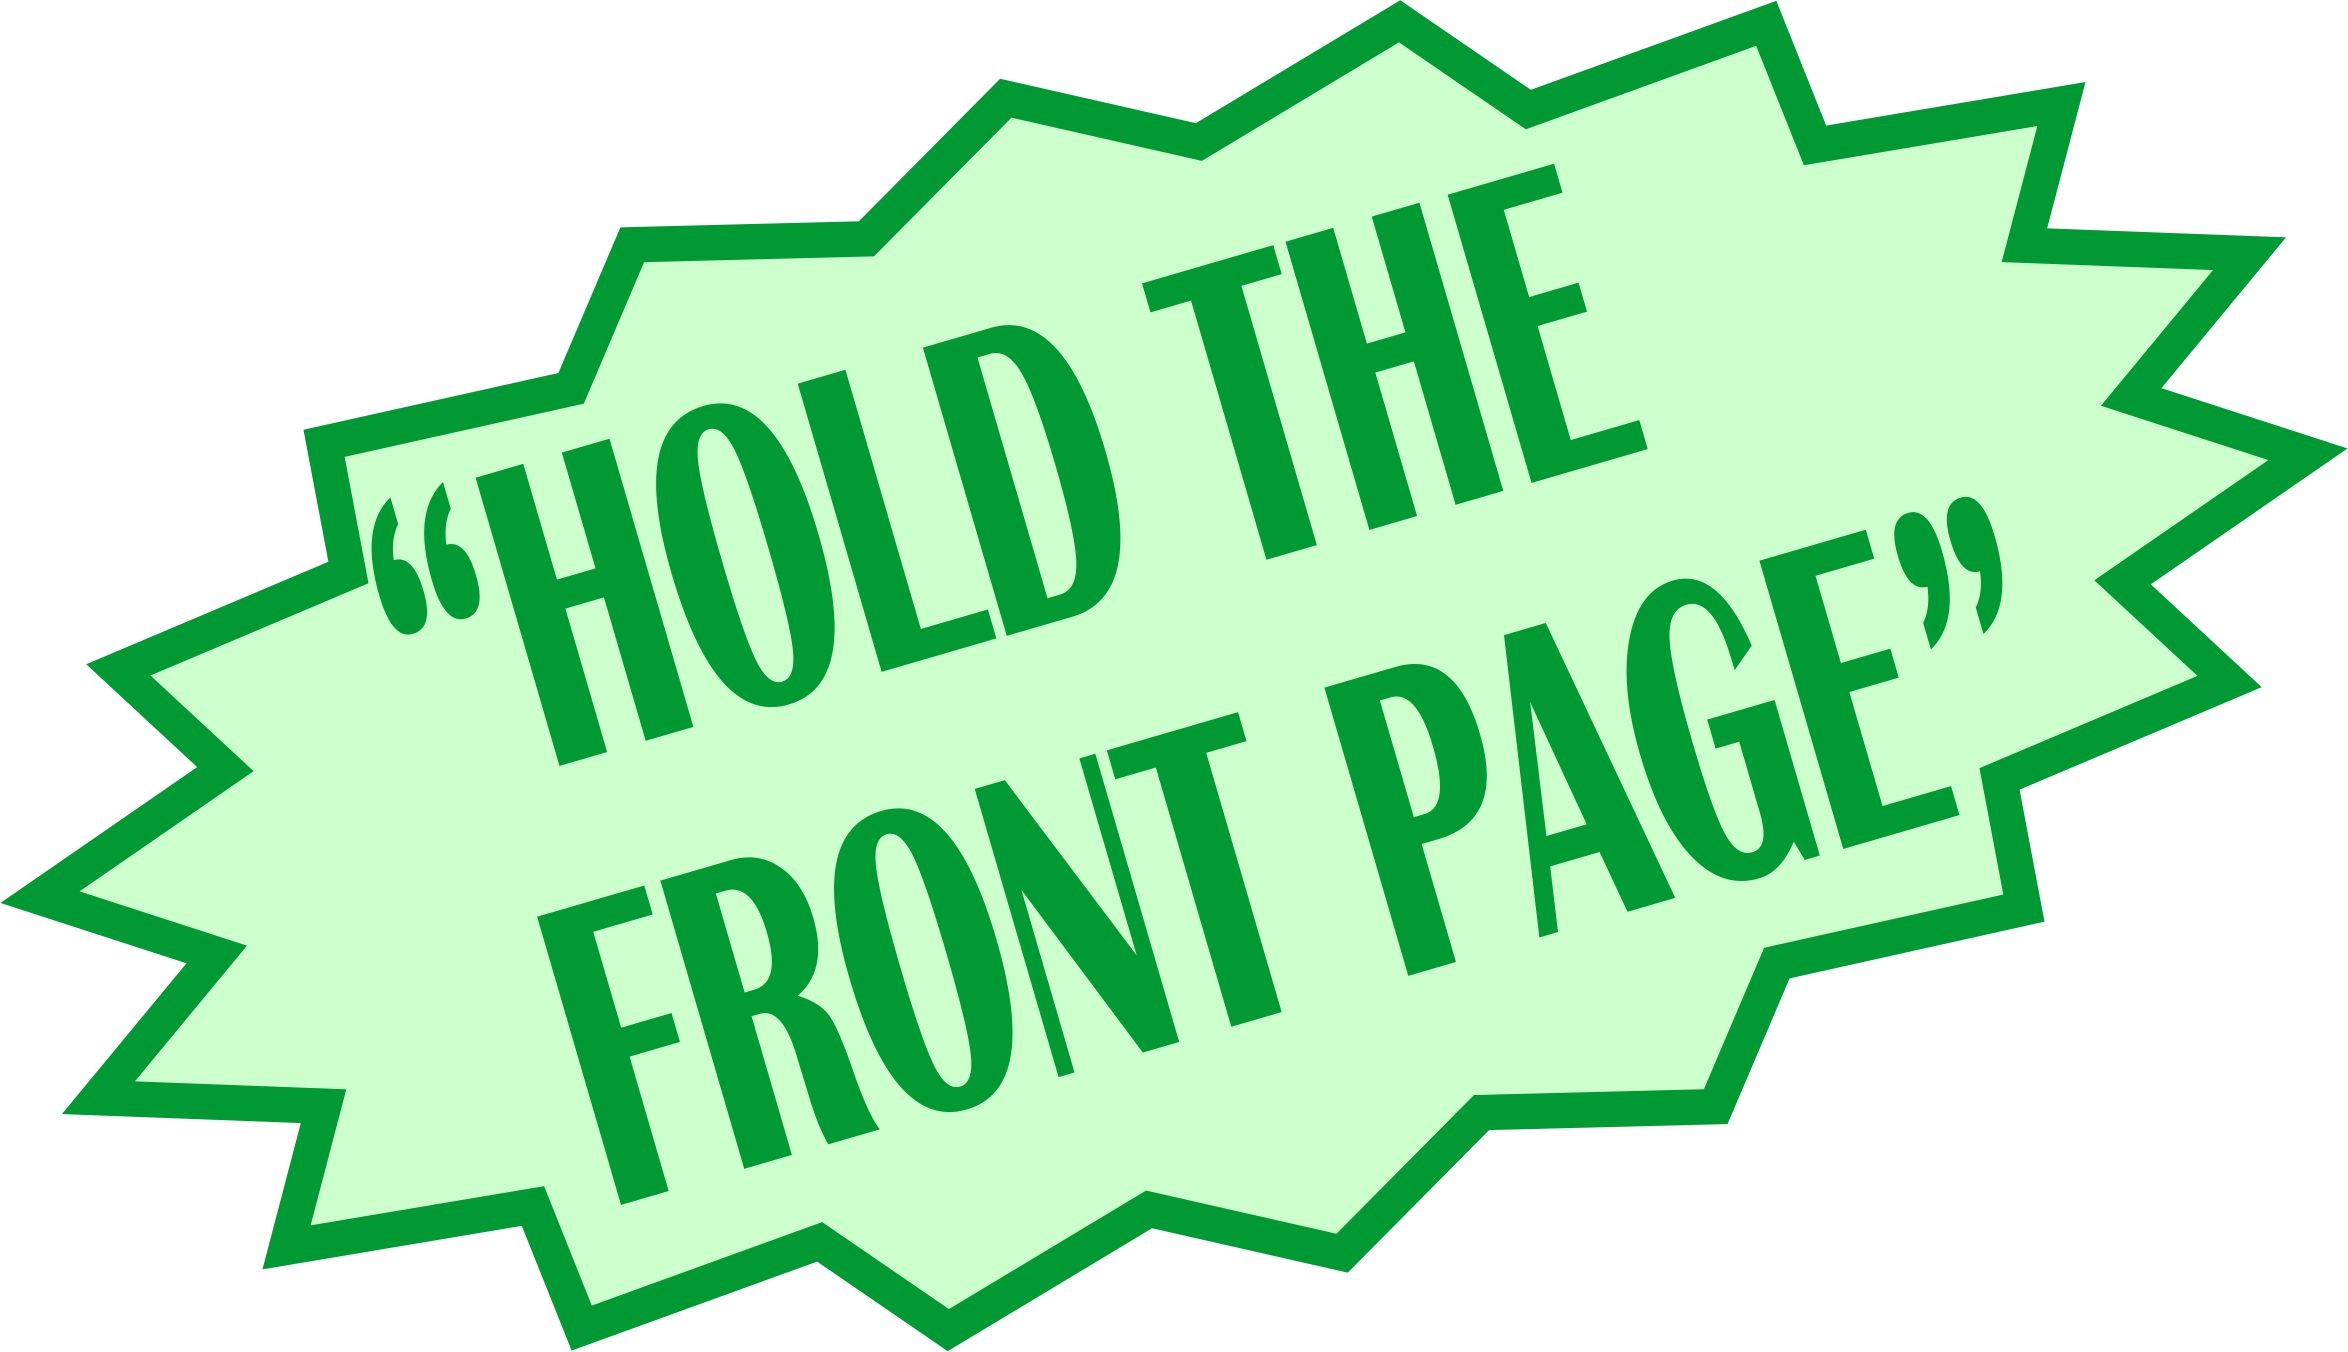 Hold the front page written in green pop out box